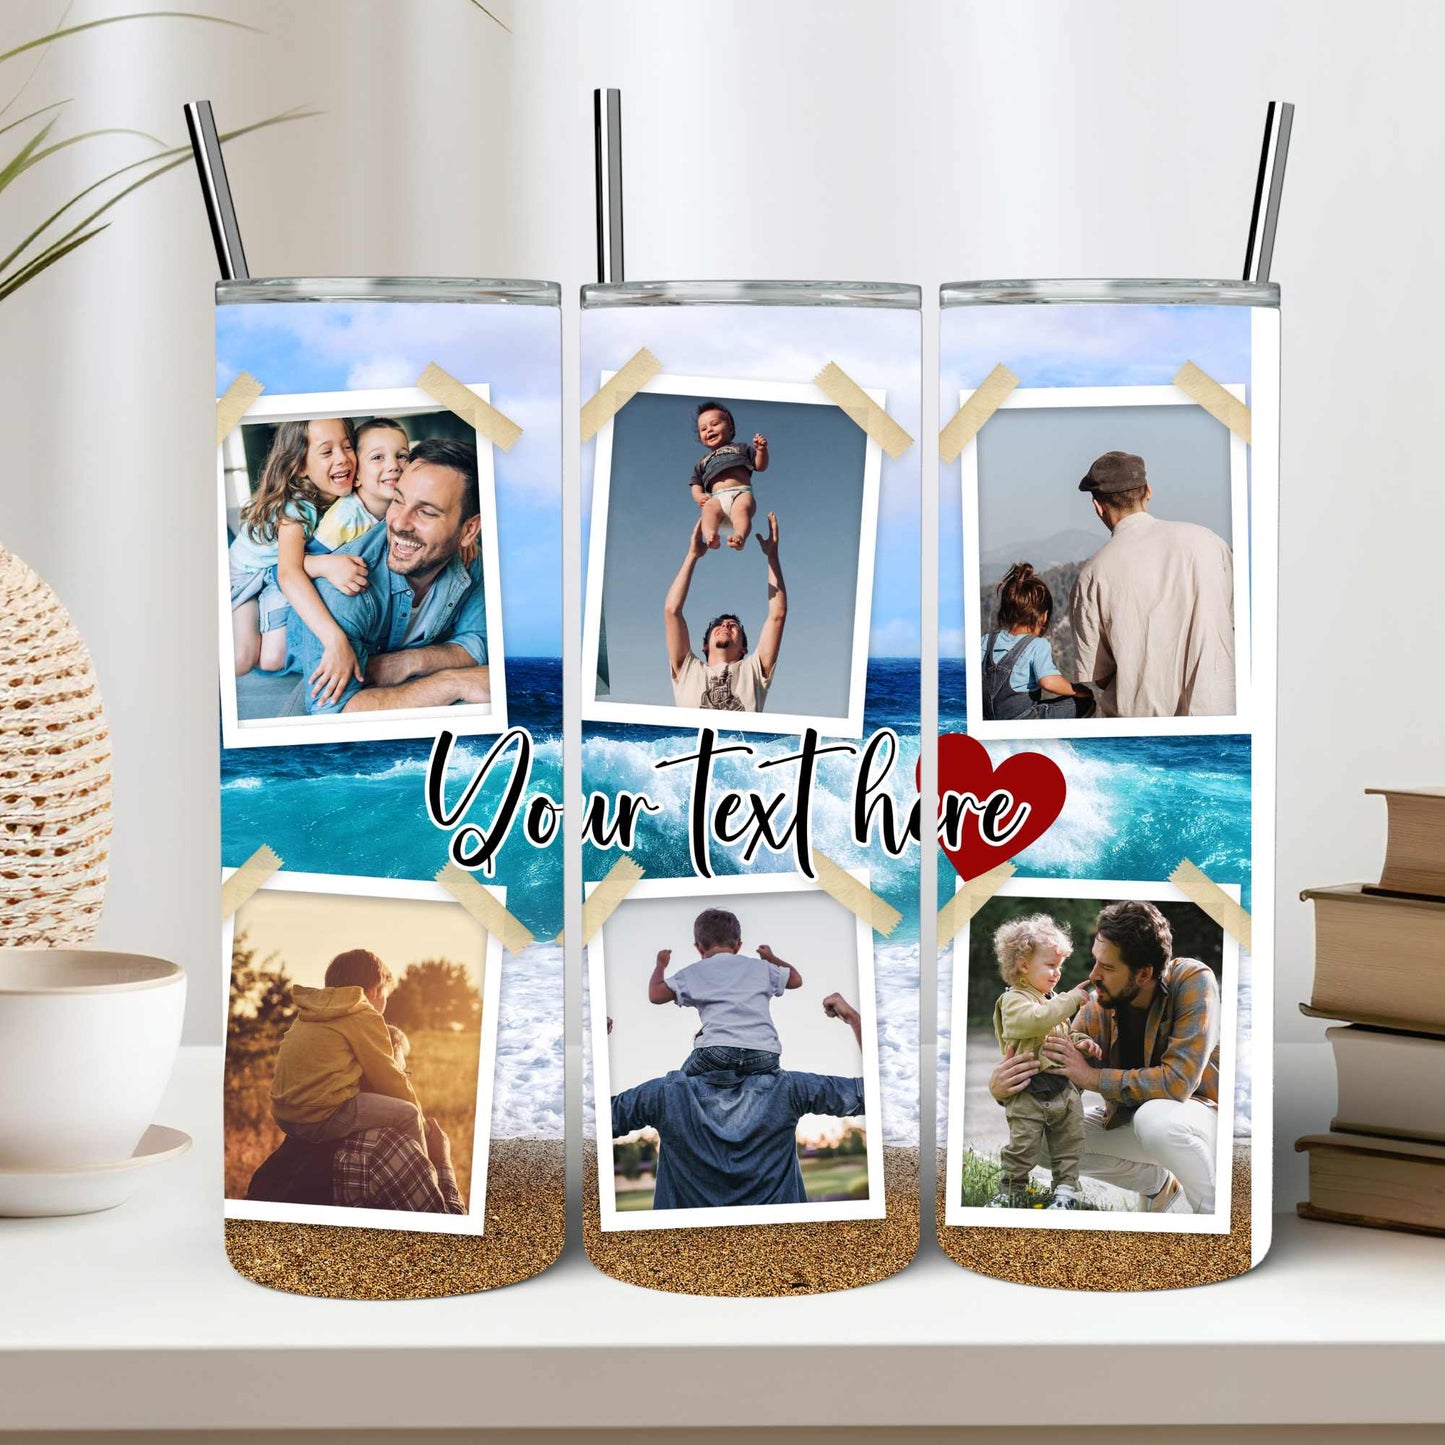 Custom Photo Tumbler 20oz - Personalized Stainless Steel Drinkware | Keeps Hot & Cold | Spill-Proof, Eco-Friendly, with Straw | Ideal Gift for All Occasions